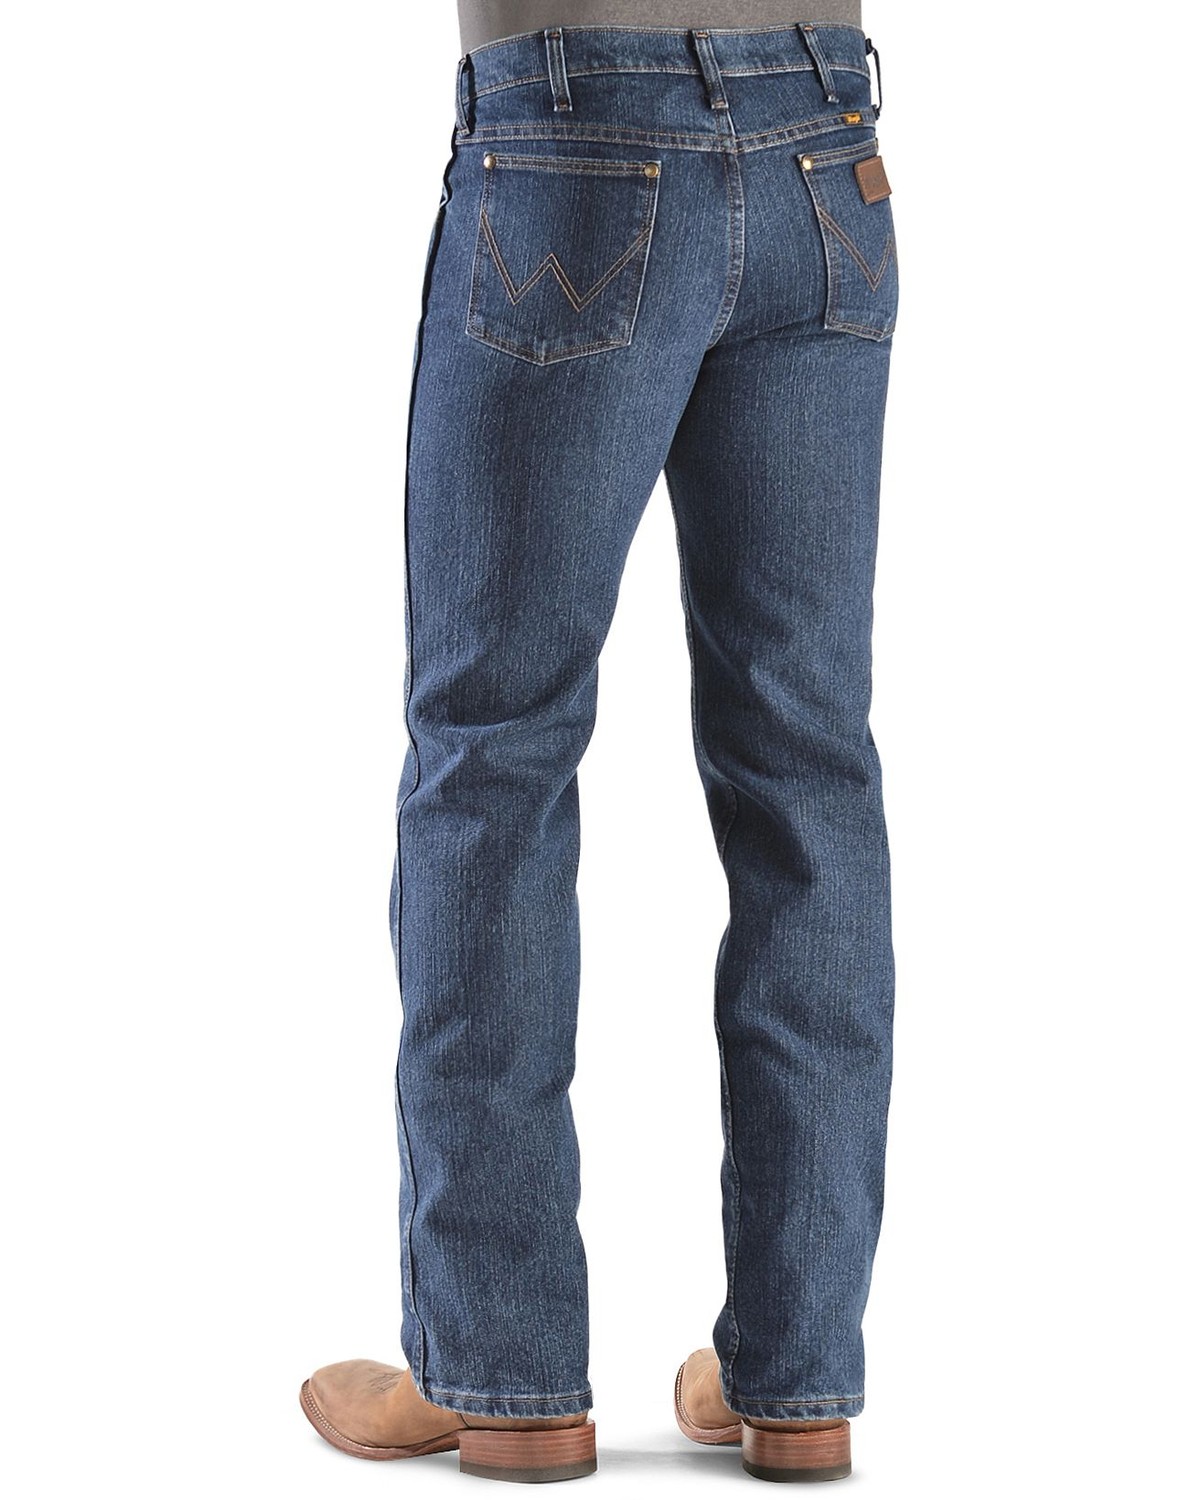 Wrangler Advanced Comfort Slim Fit Jeans - Reg - Country Outfitter